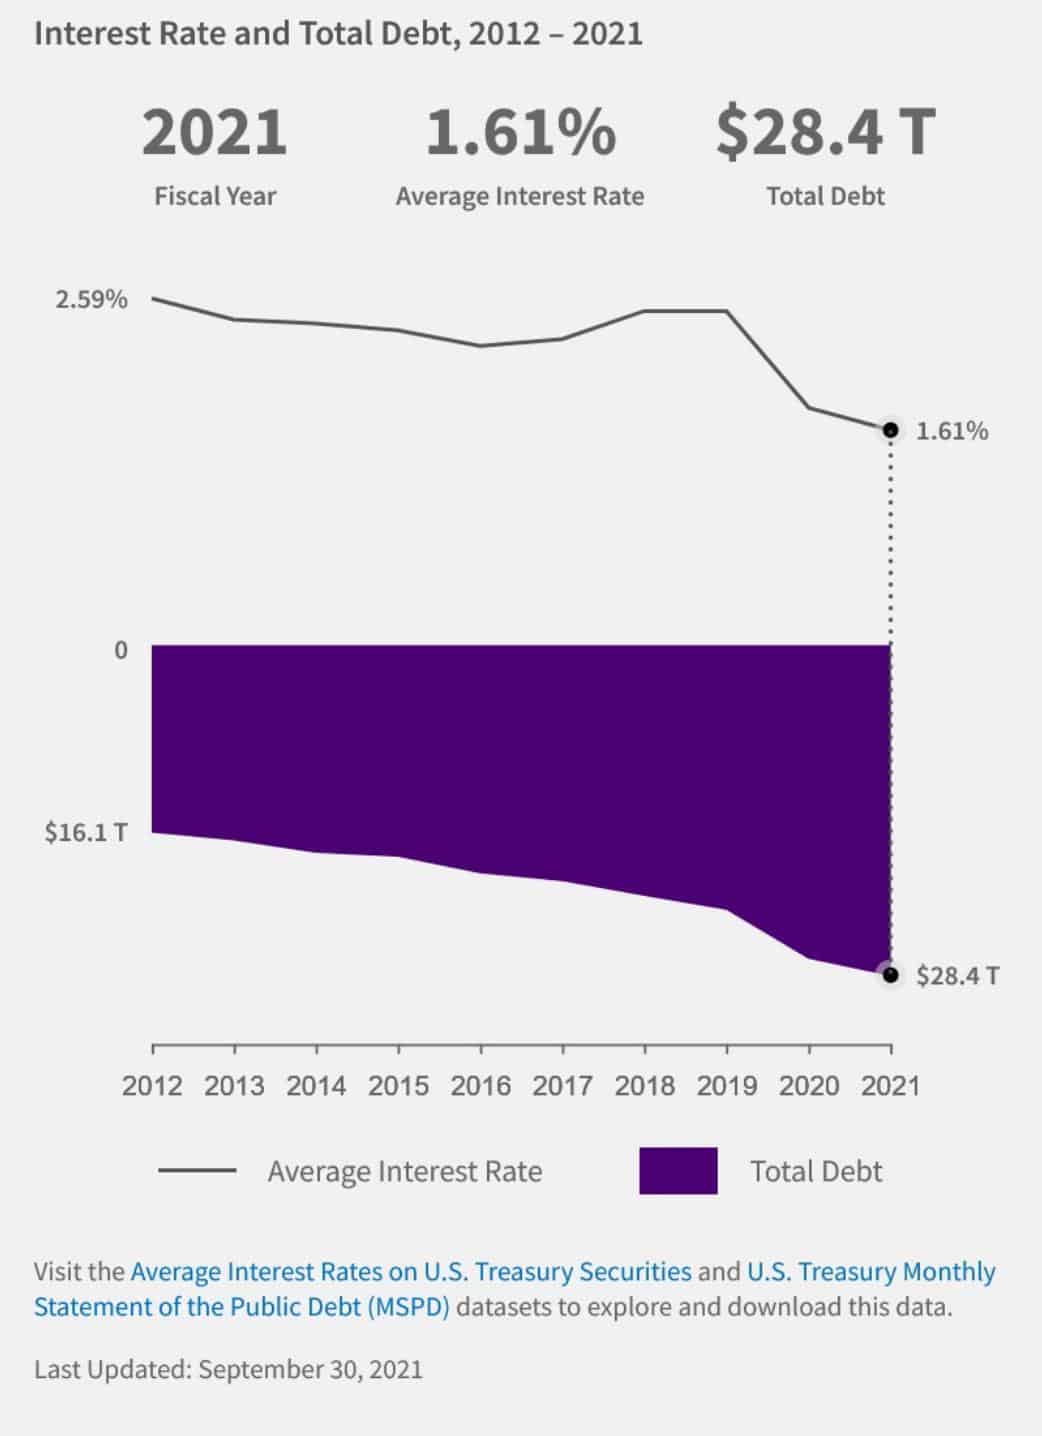 US Government Interest Rate on Debt